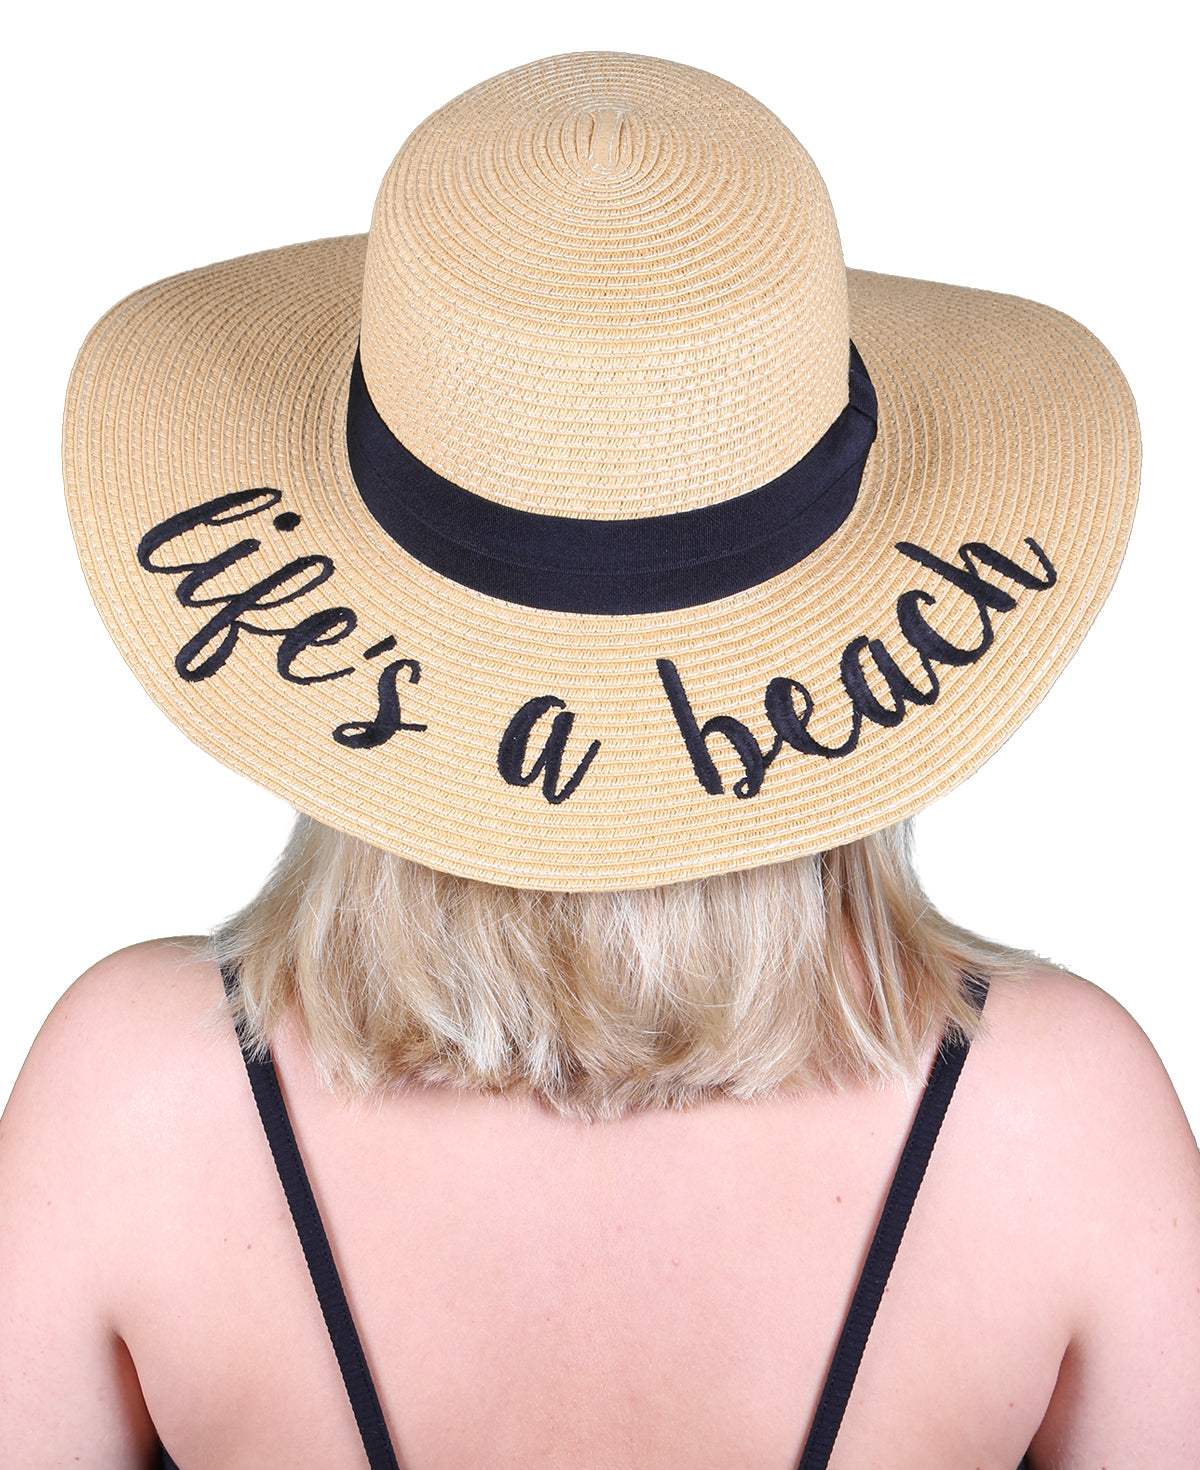 Lifes a beach hat rose all day hat do not disturb hat straw hat summer ...